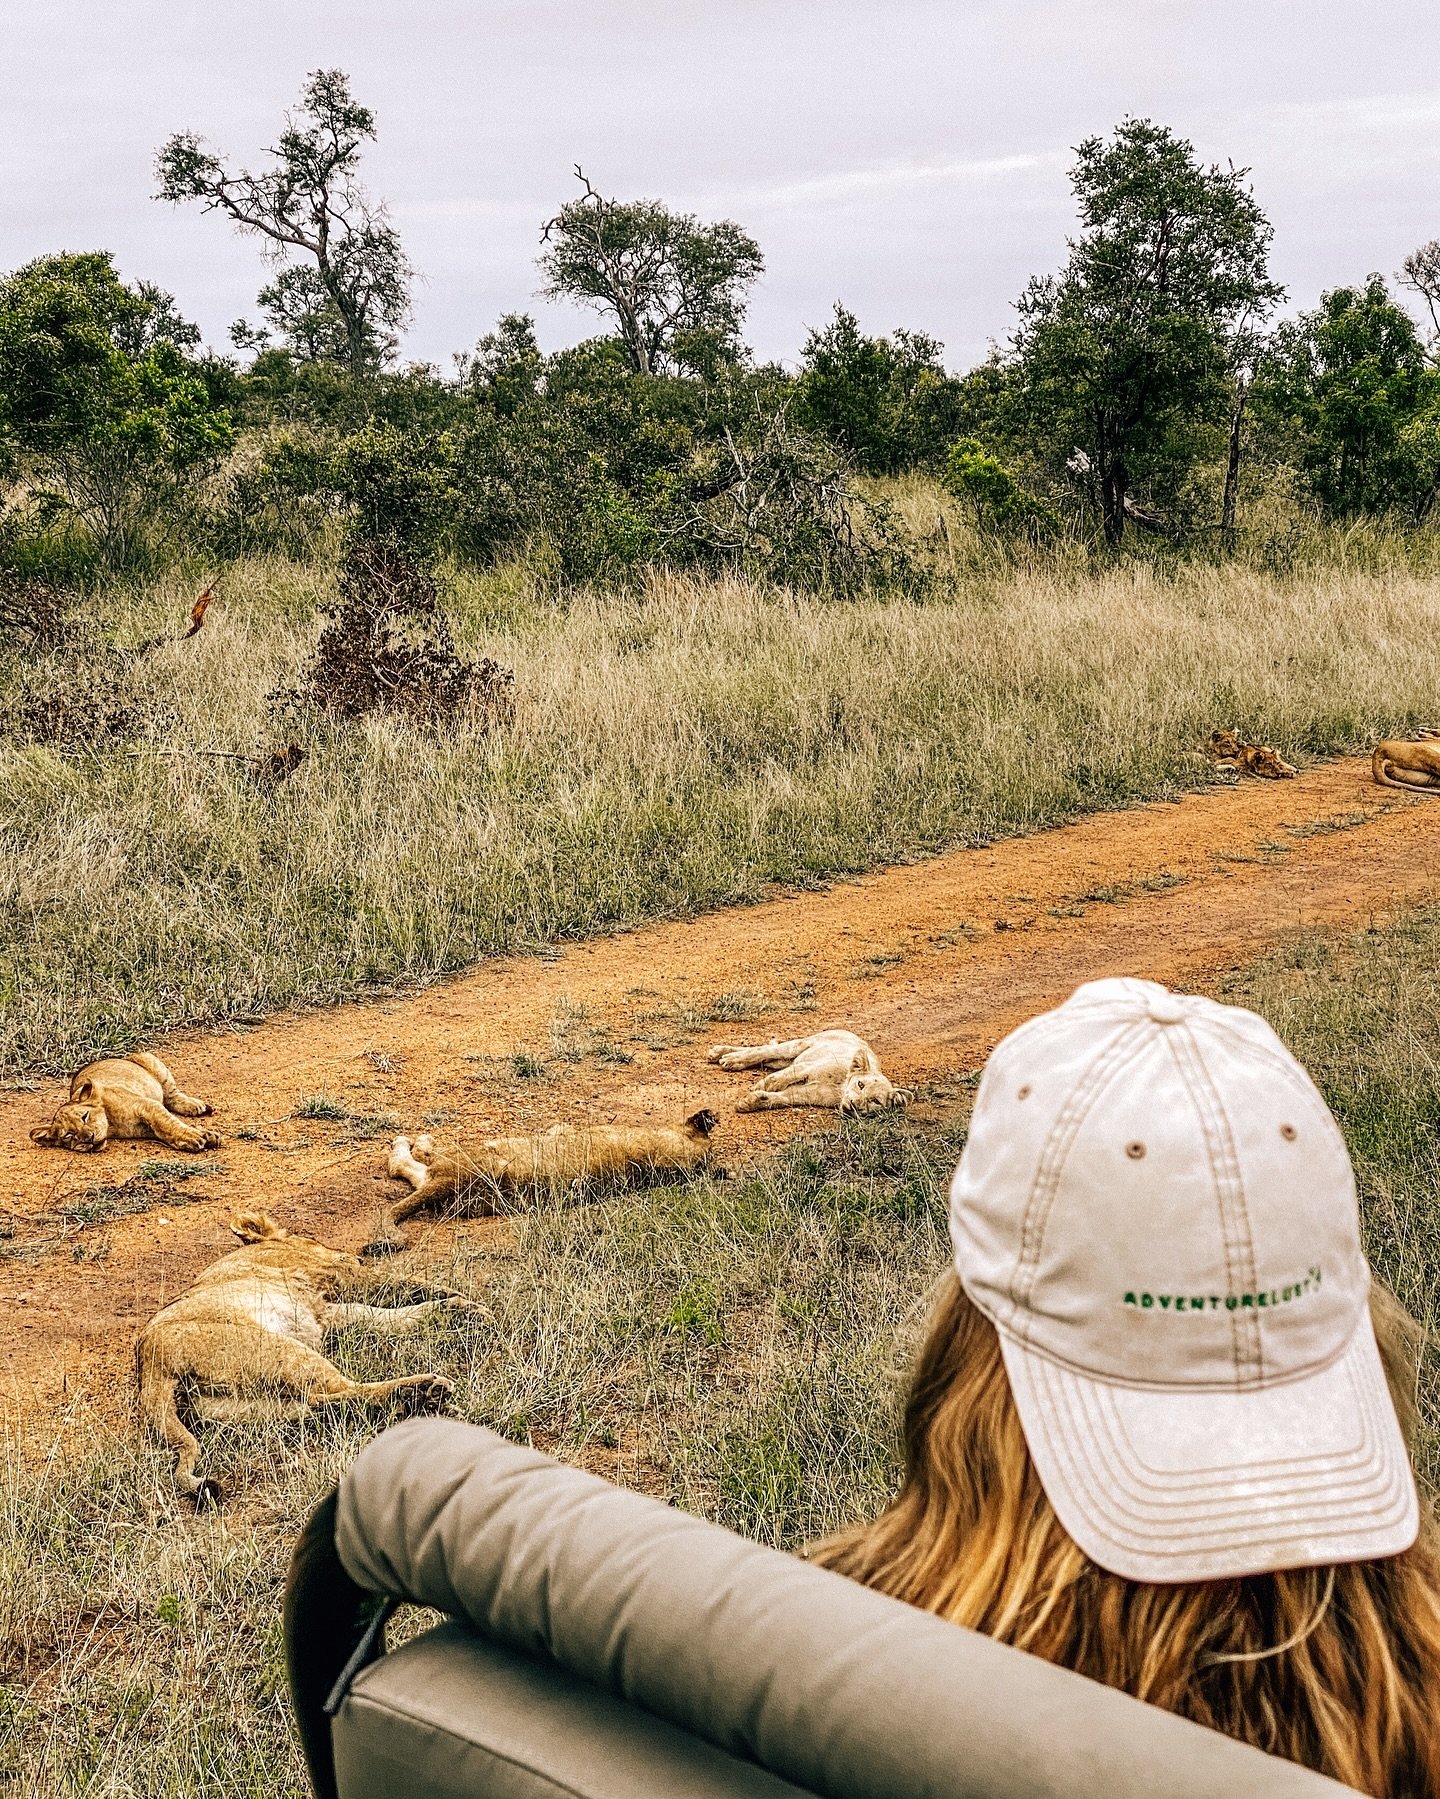 never ever did i imagine

that when i launched my brand/biz/empire back in 2020

that eventually it would lead me to lock eyes

with a white lion cub.

😭😭😭🤍🤍🤍

top 5 safari moments, top 5 life moments. never gonna forget this one 🥺✨

#flowingn